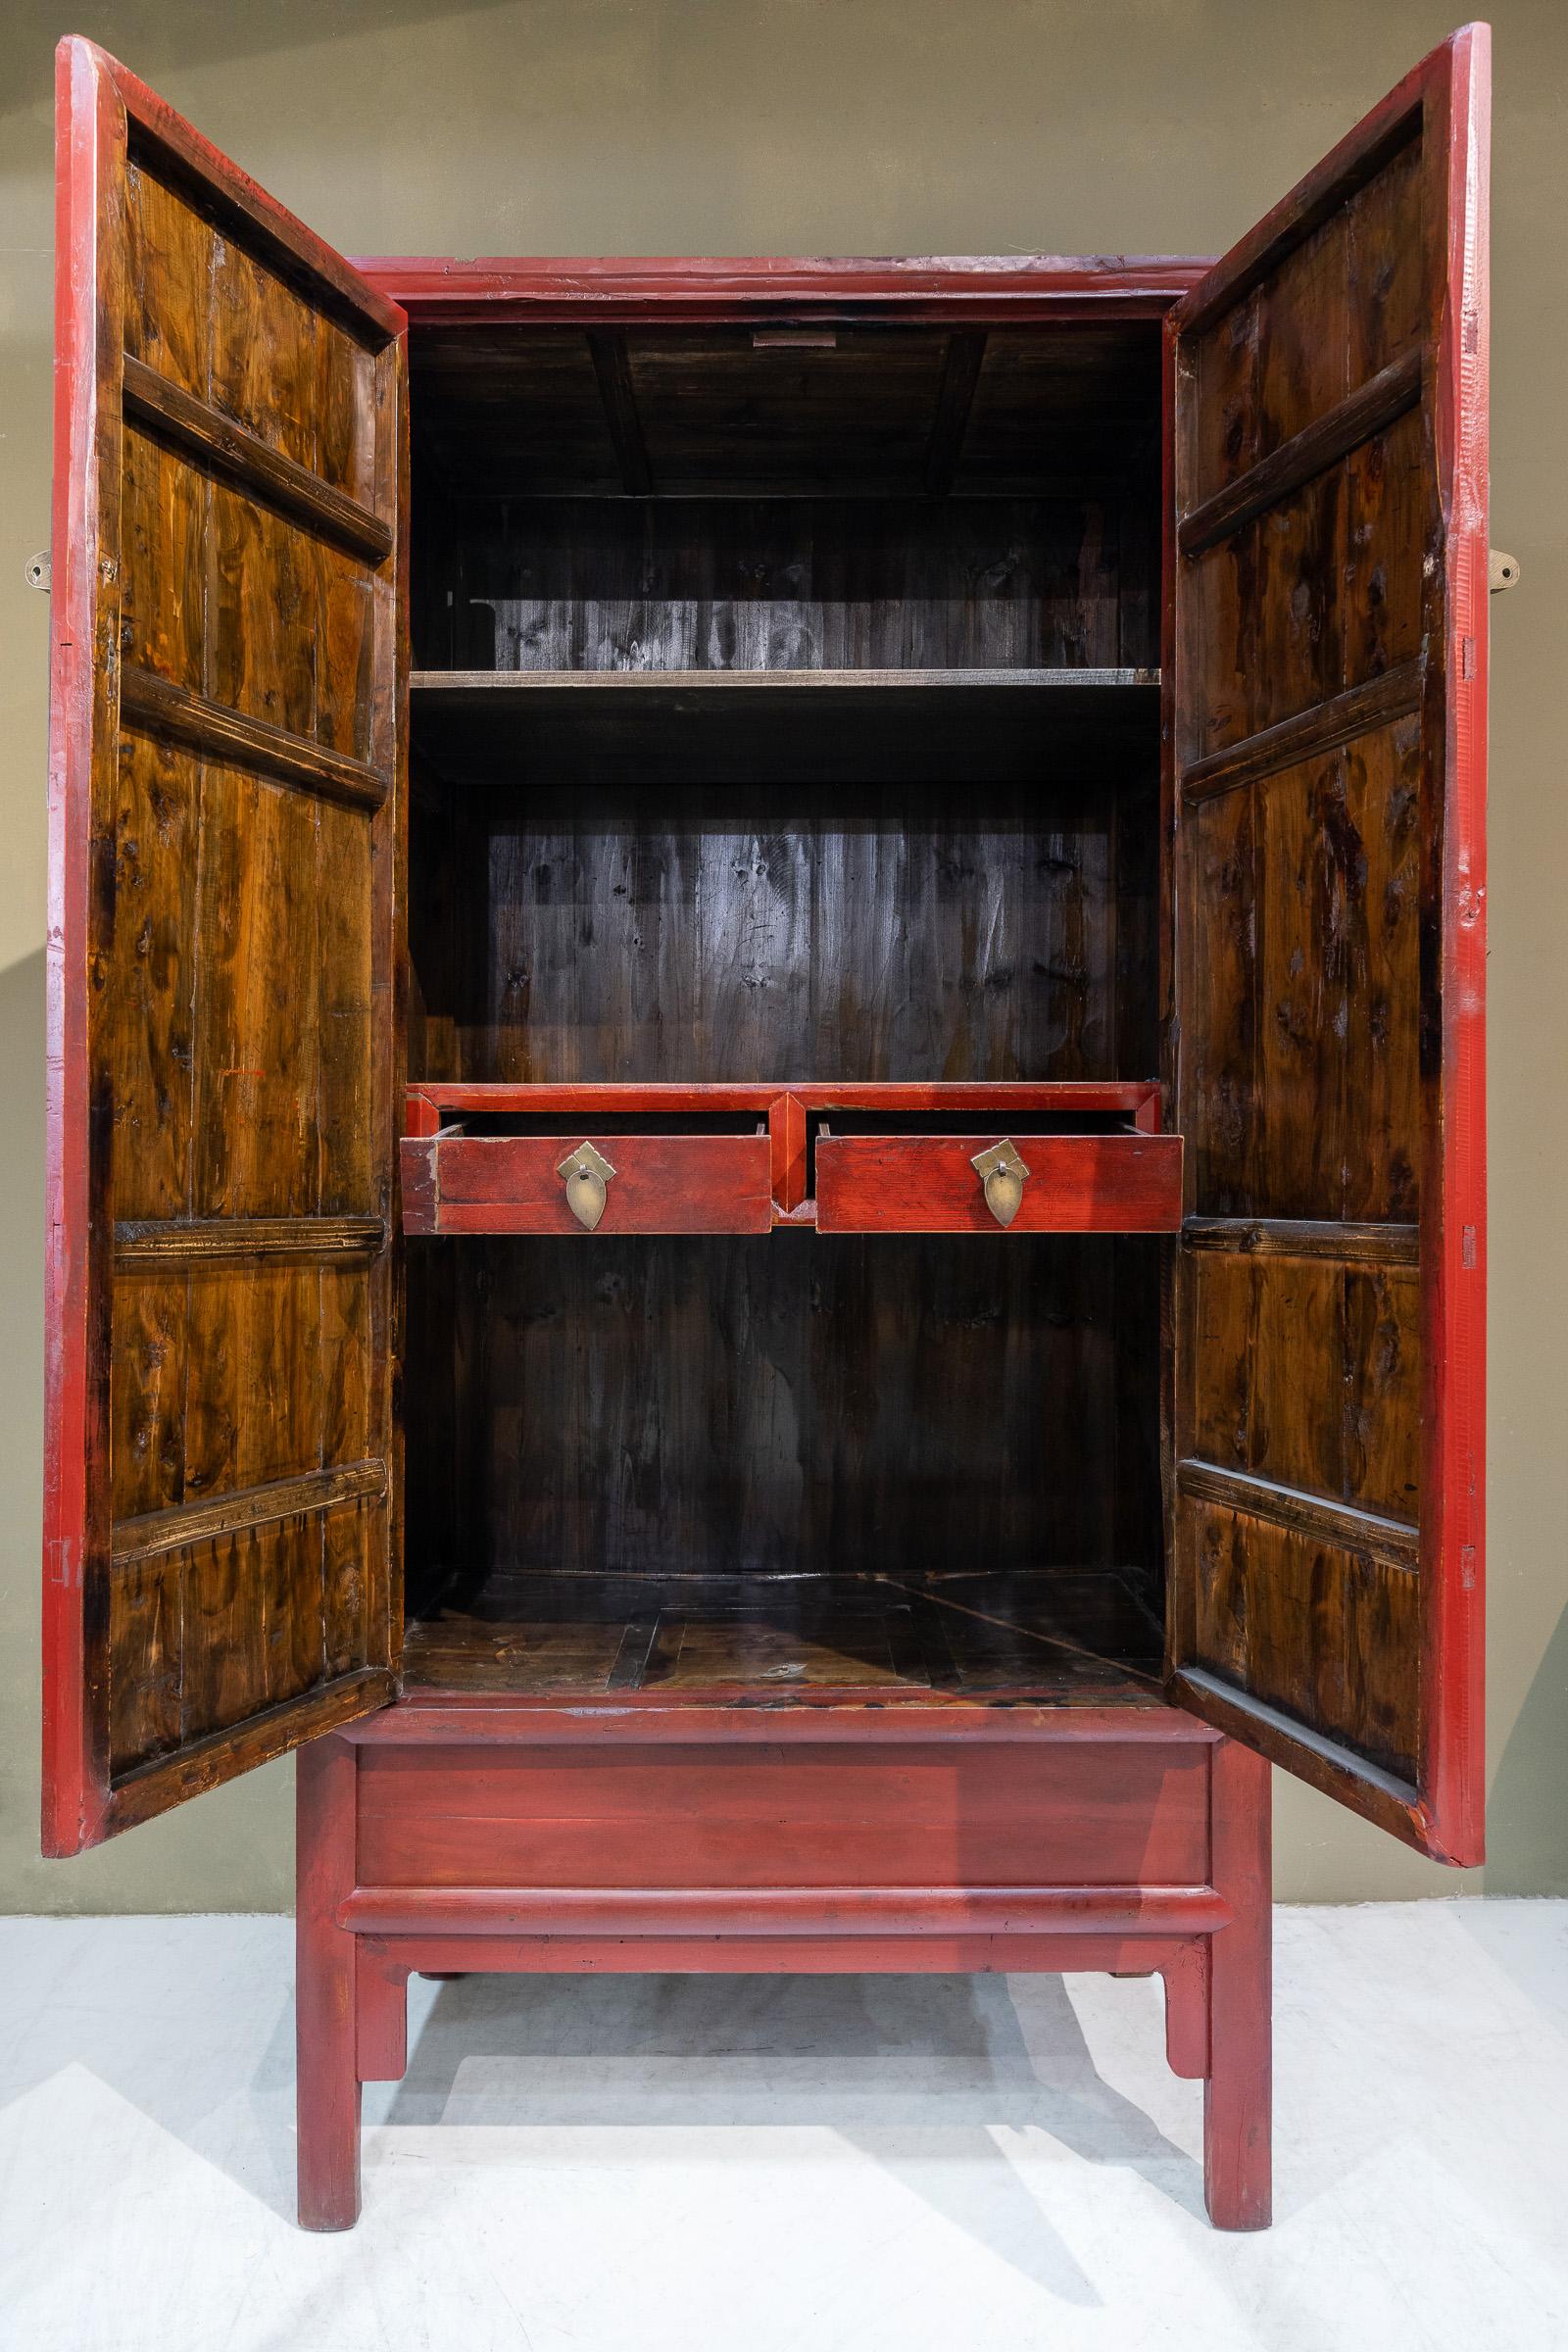 A classic Ming-style design, the round corner tapered cabinet, this piece in red lacquer was made using Cypress wood and was used in bedrooms as a wardrobe, storing clothing as well as bedding. The round brass plate on the doors are original, it has